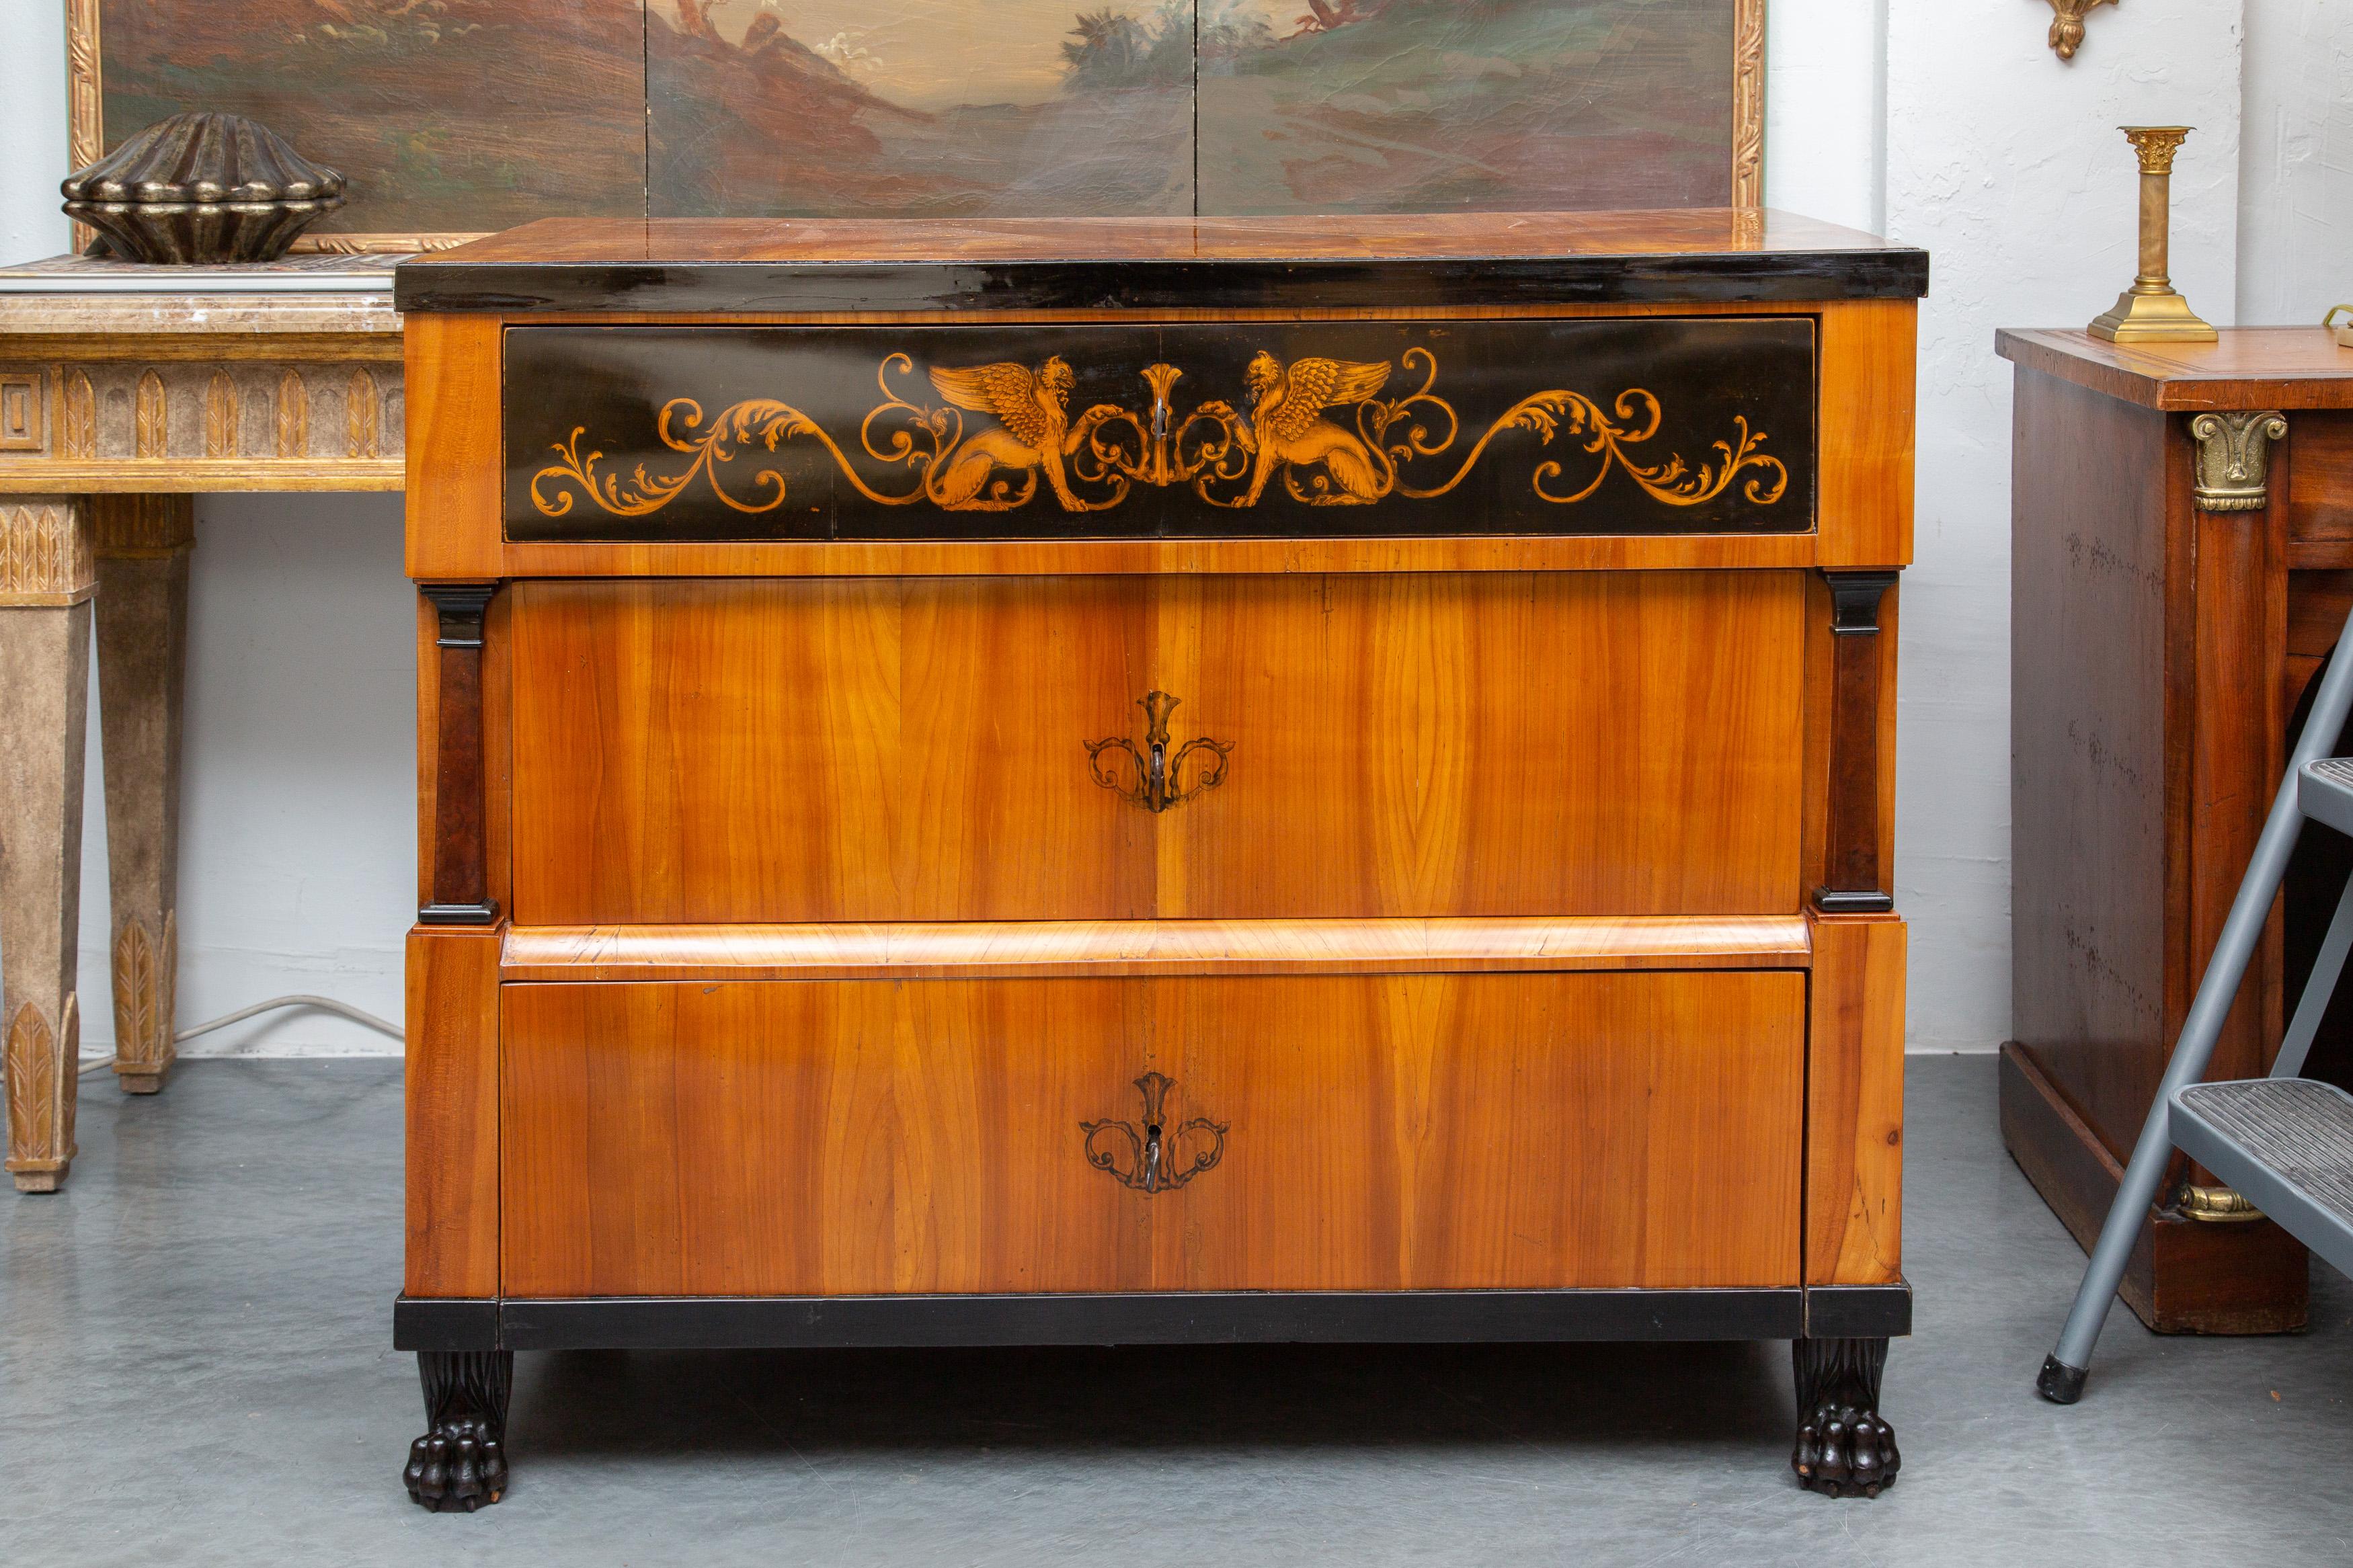 This is a transitional Empire-Biedermeier satinwood and ebonized commode. This unusual blend of design elements offers a unique home furnishing. Mid 19th century.